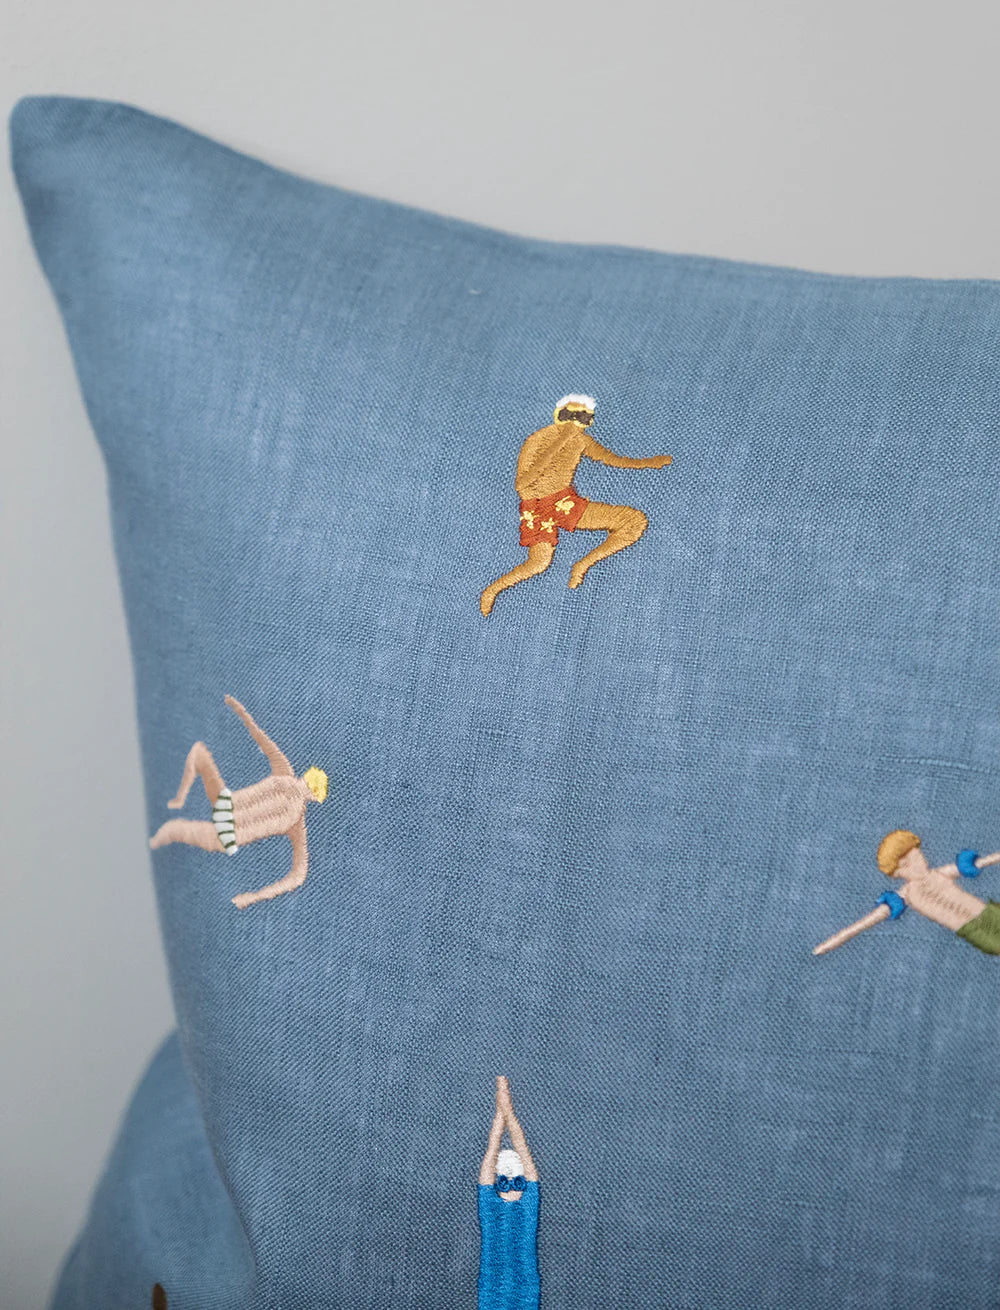 Swimmers Embroidered Cushion Cover w. Inner Cushion in Blue Linen